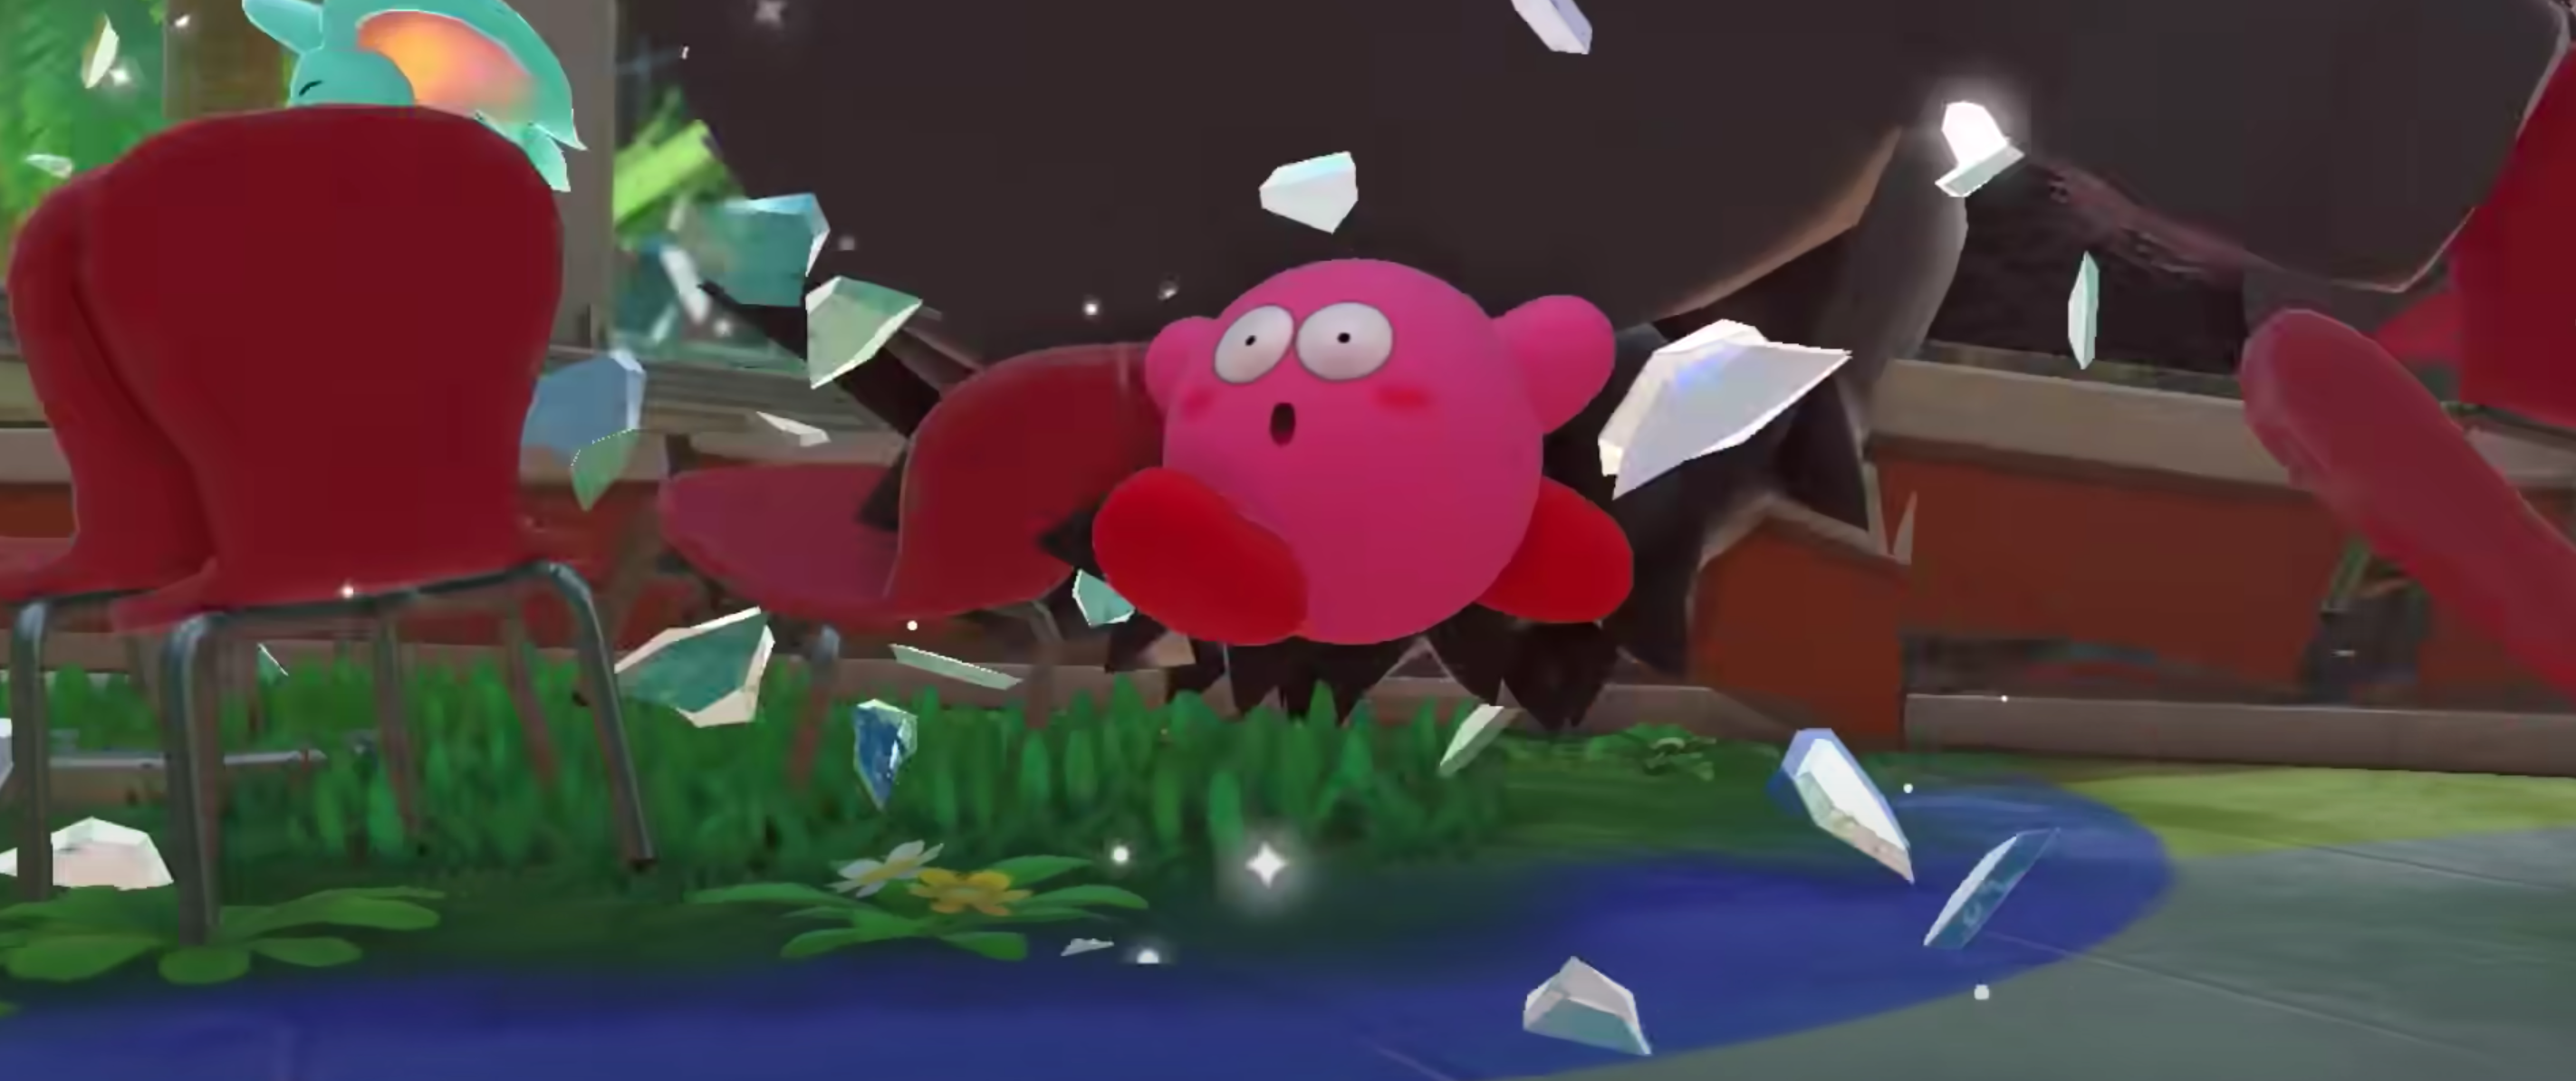 Will There Be DLC for 'Kirby and the Forgotten Land'? Fans Want to